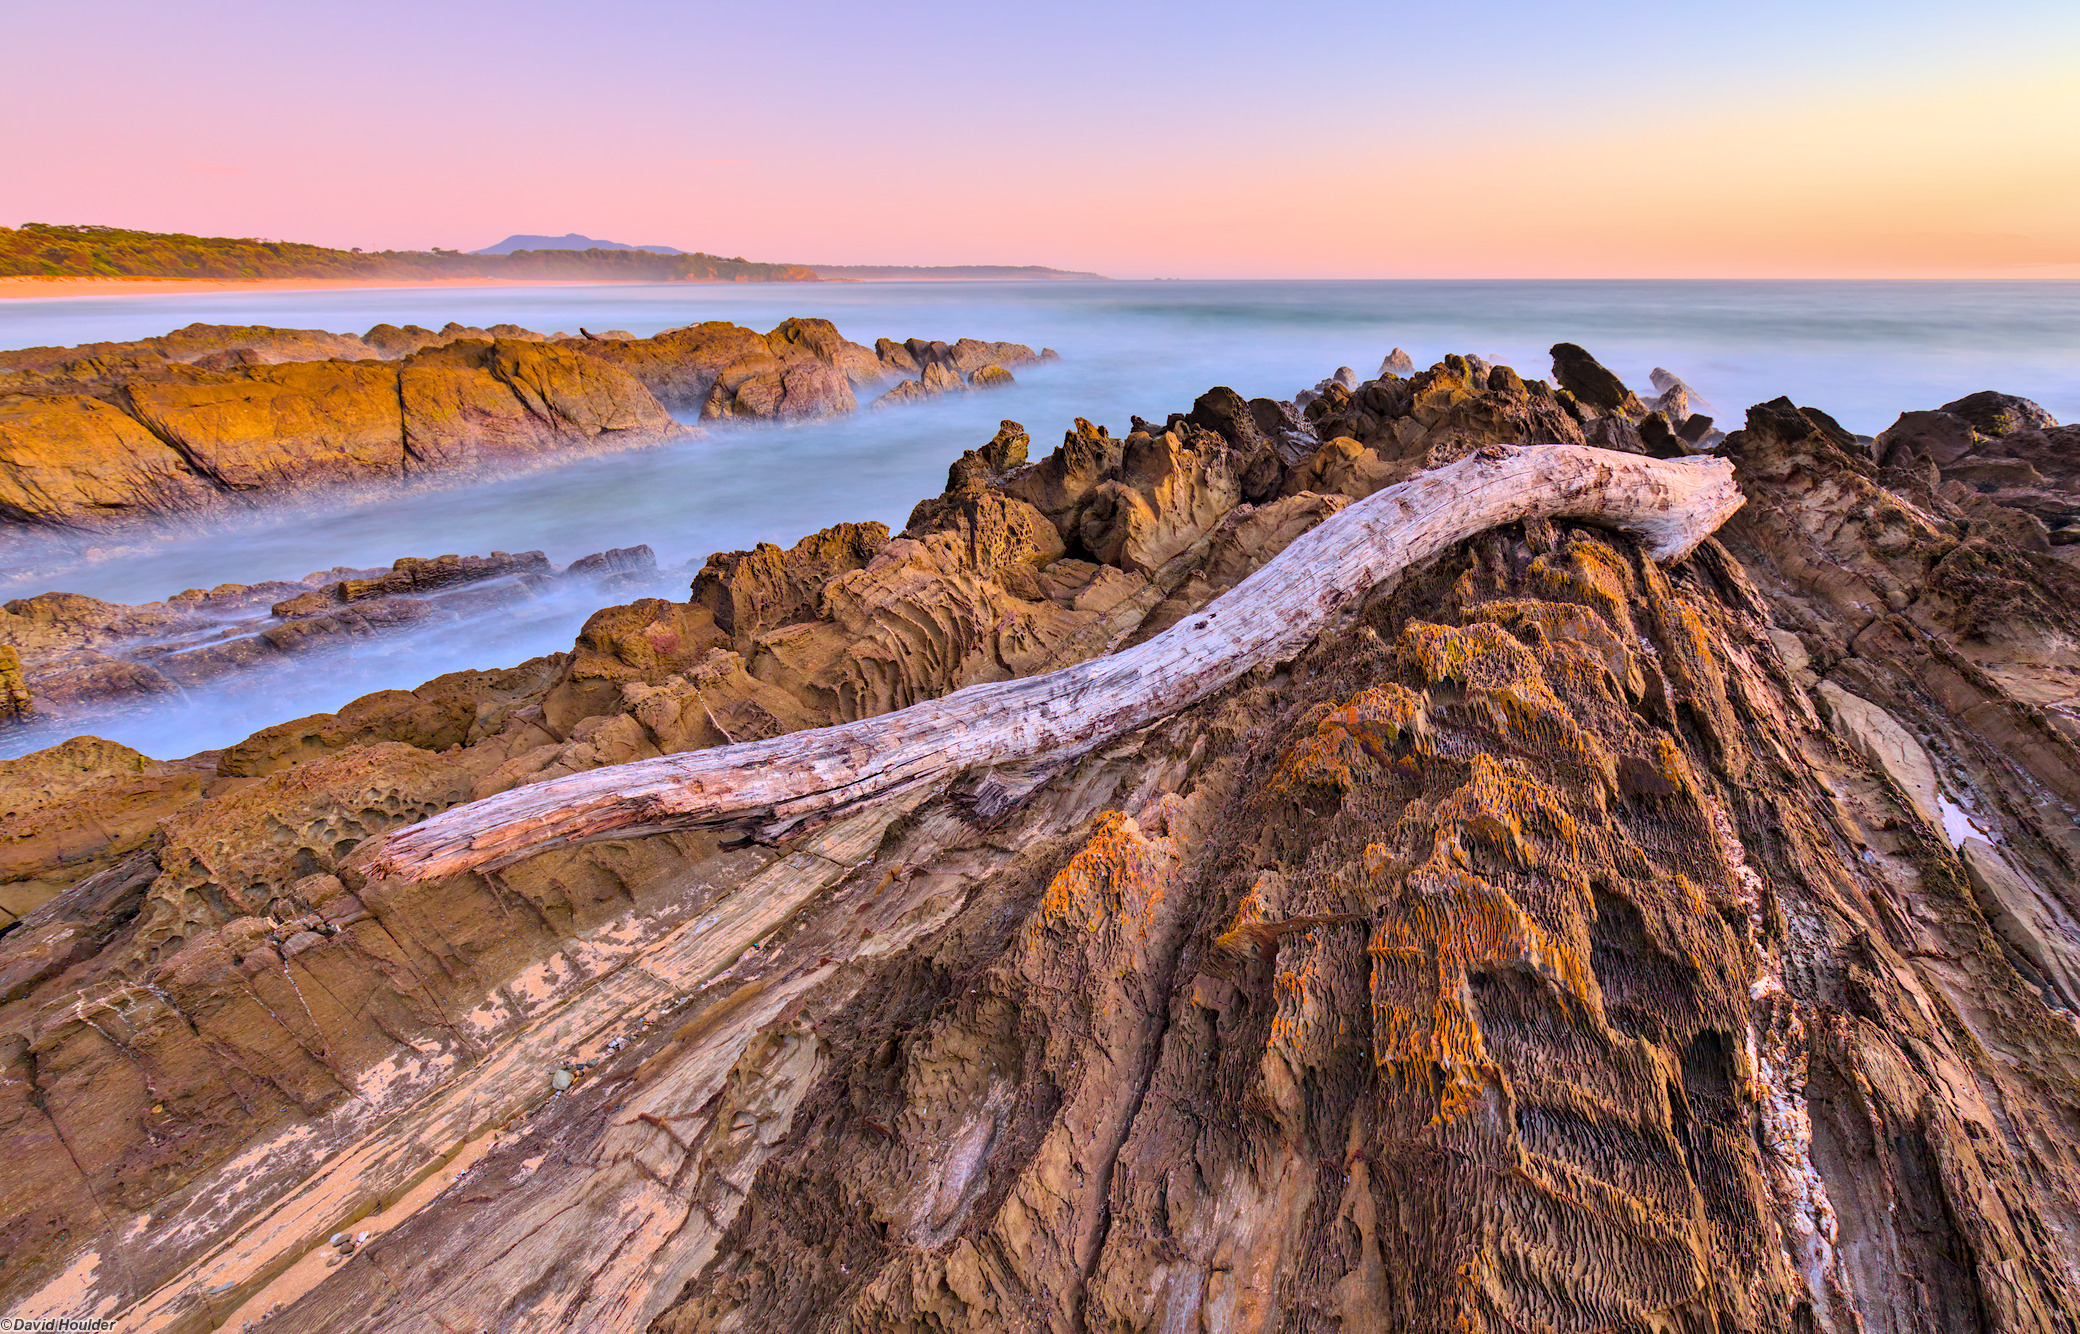 A weathered tree trunk sitting on a rocky outcrop with the ocean in the background